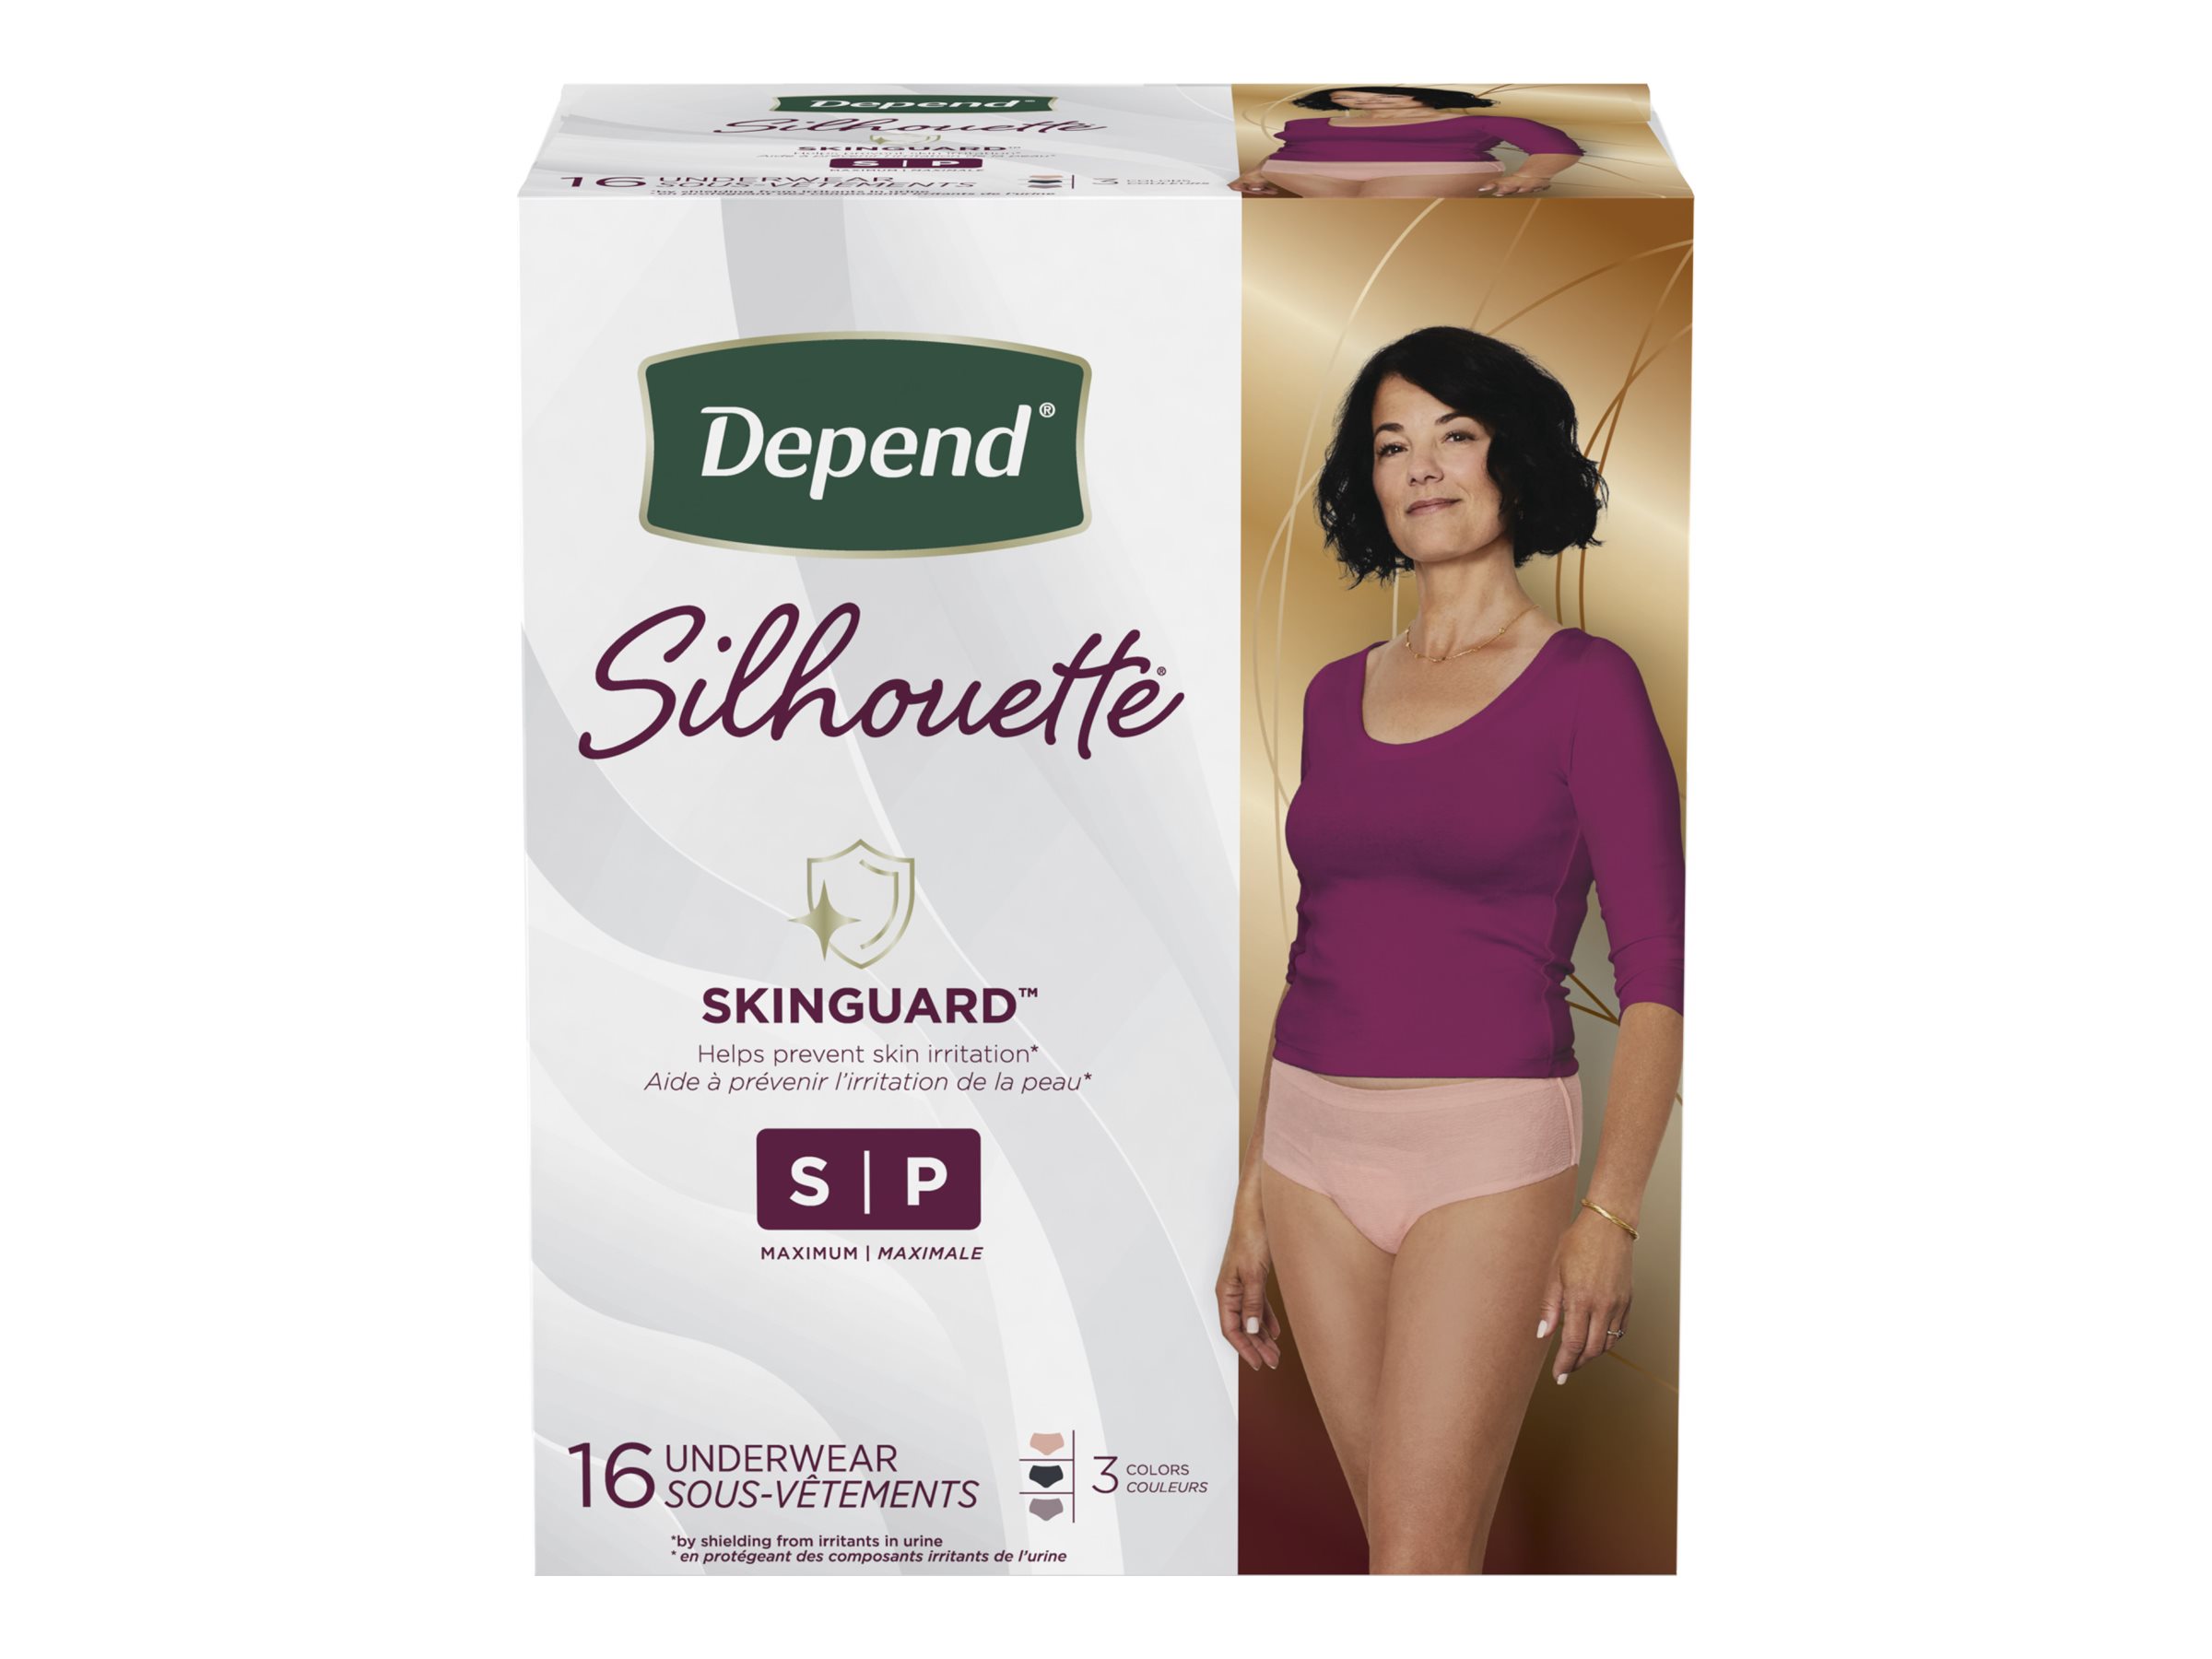 Depend Silhouette Active Fit Incontinence Underwear for Women